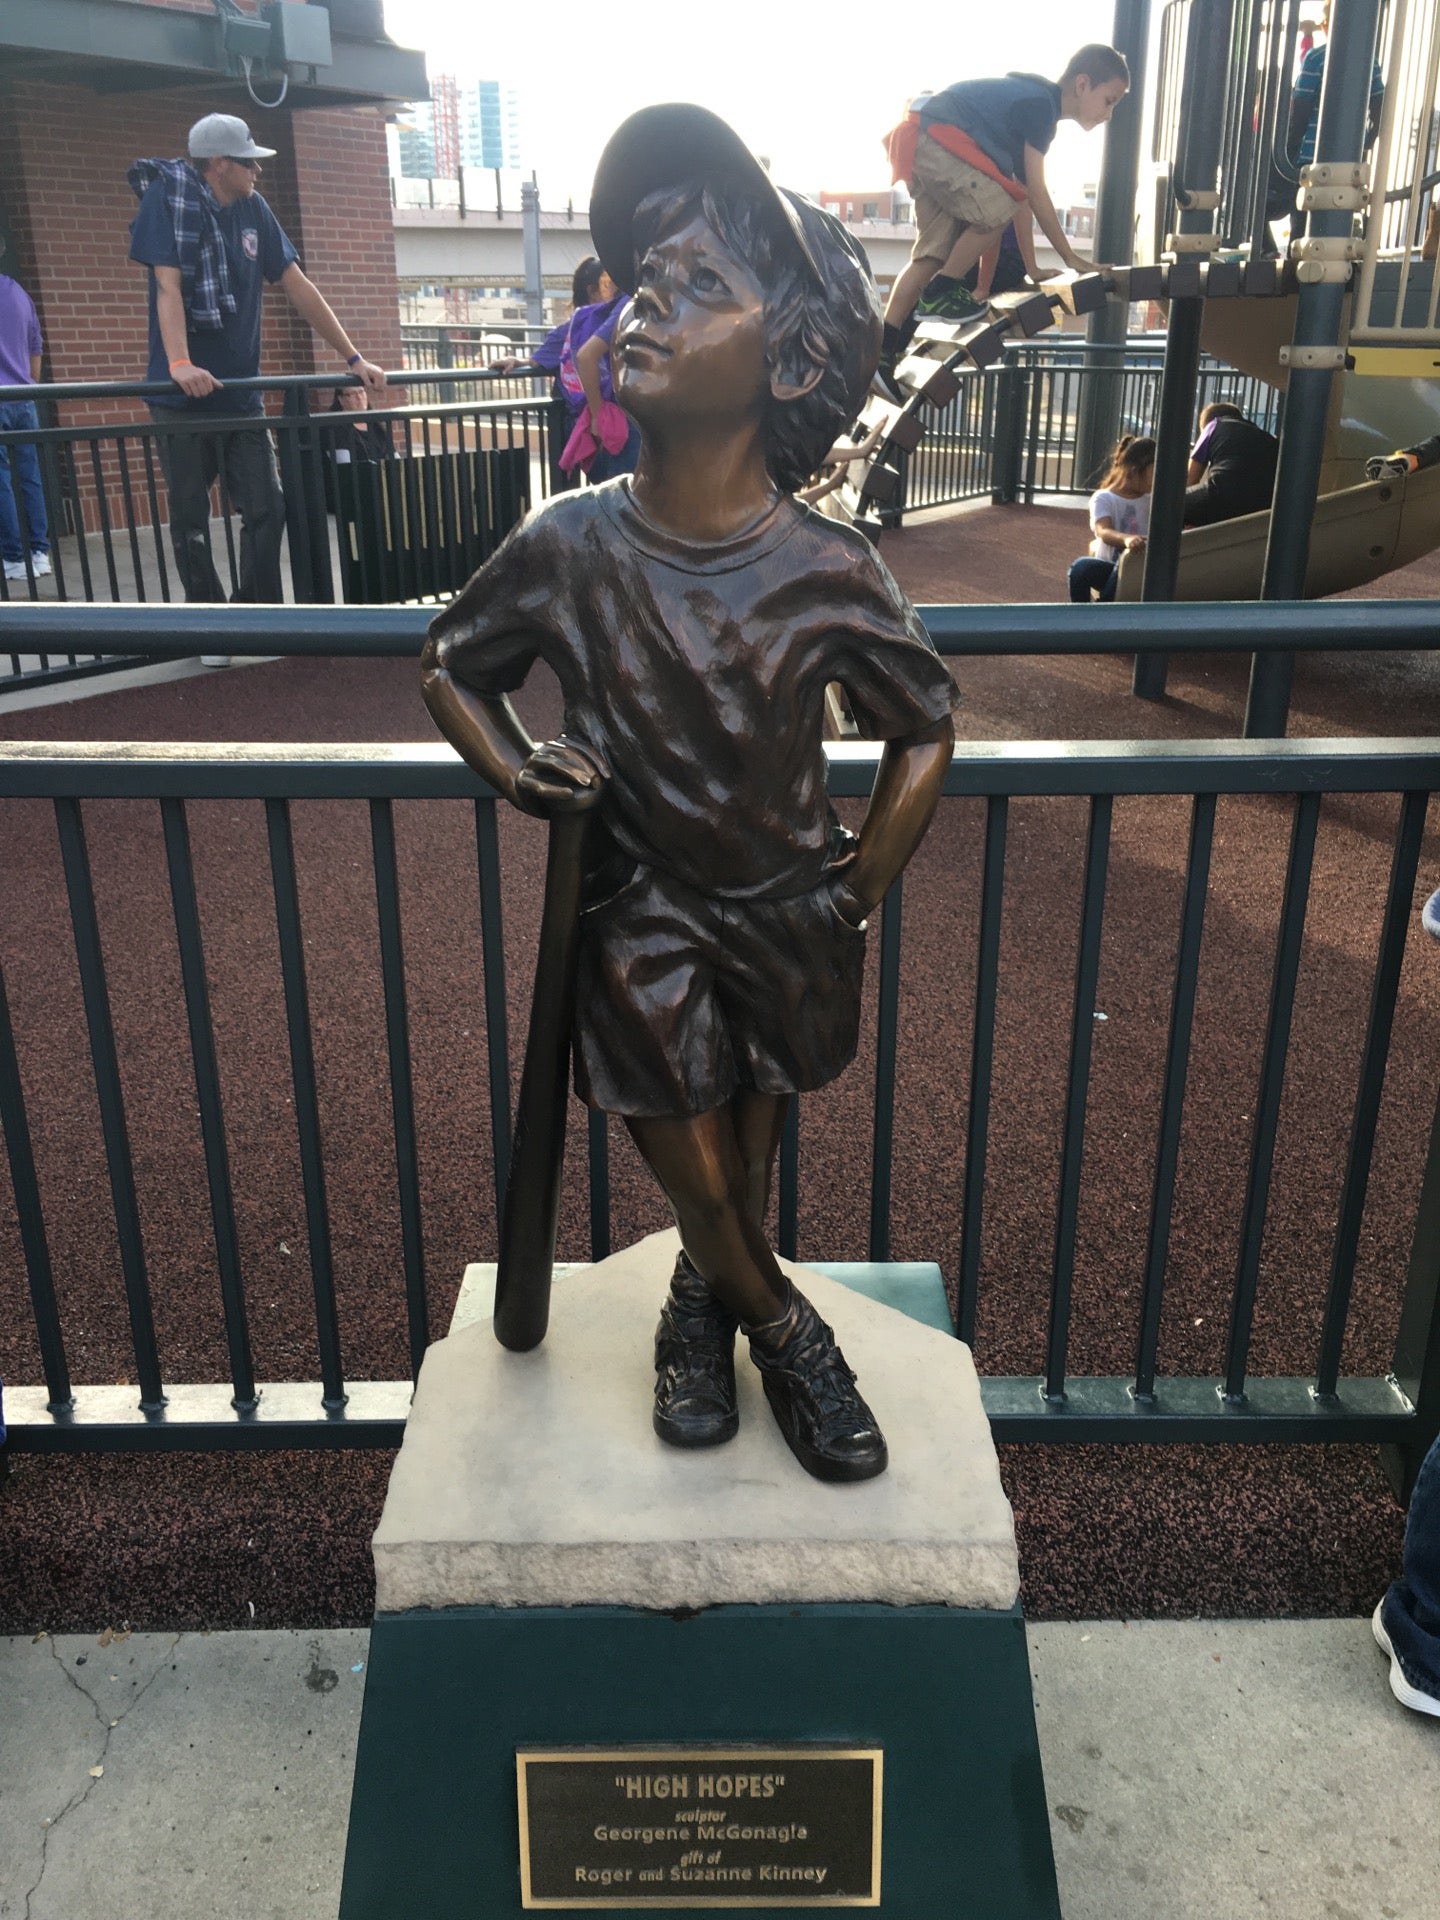 Denver - LoDo: Coors Field, Coors Field, located at 2001 Bl…